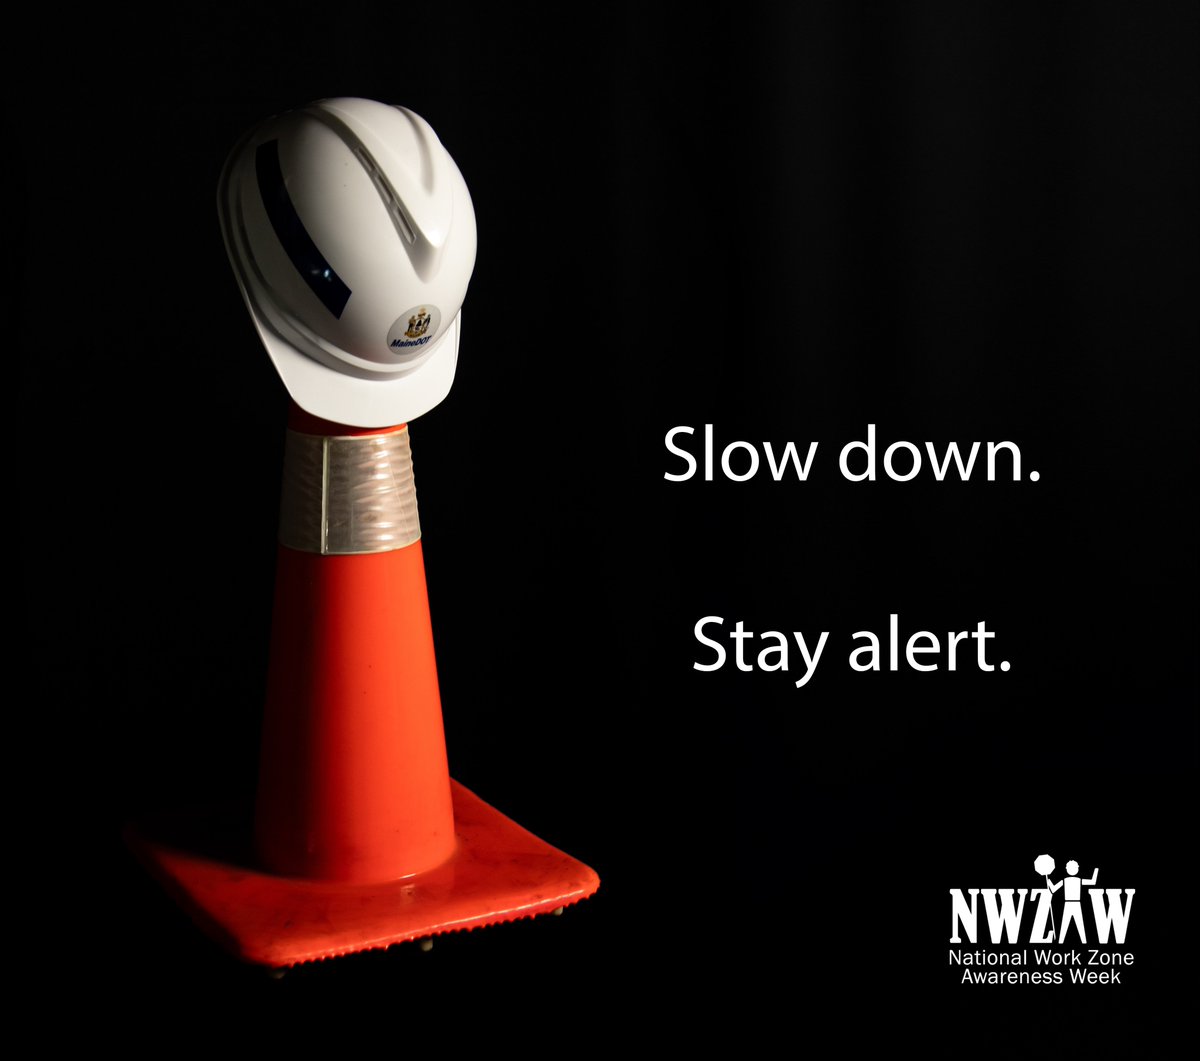 Today, we pause for a moment of silence to remember those who have lost their lives to work zone crashes. Please do your part by slowing down and staying alert while travelling in work zones. #NWZAW